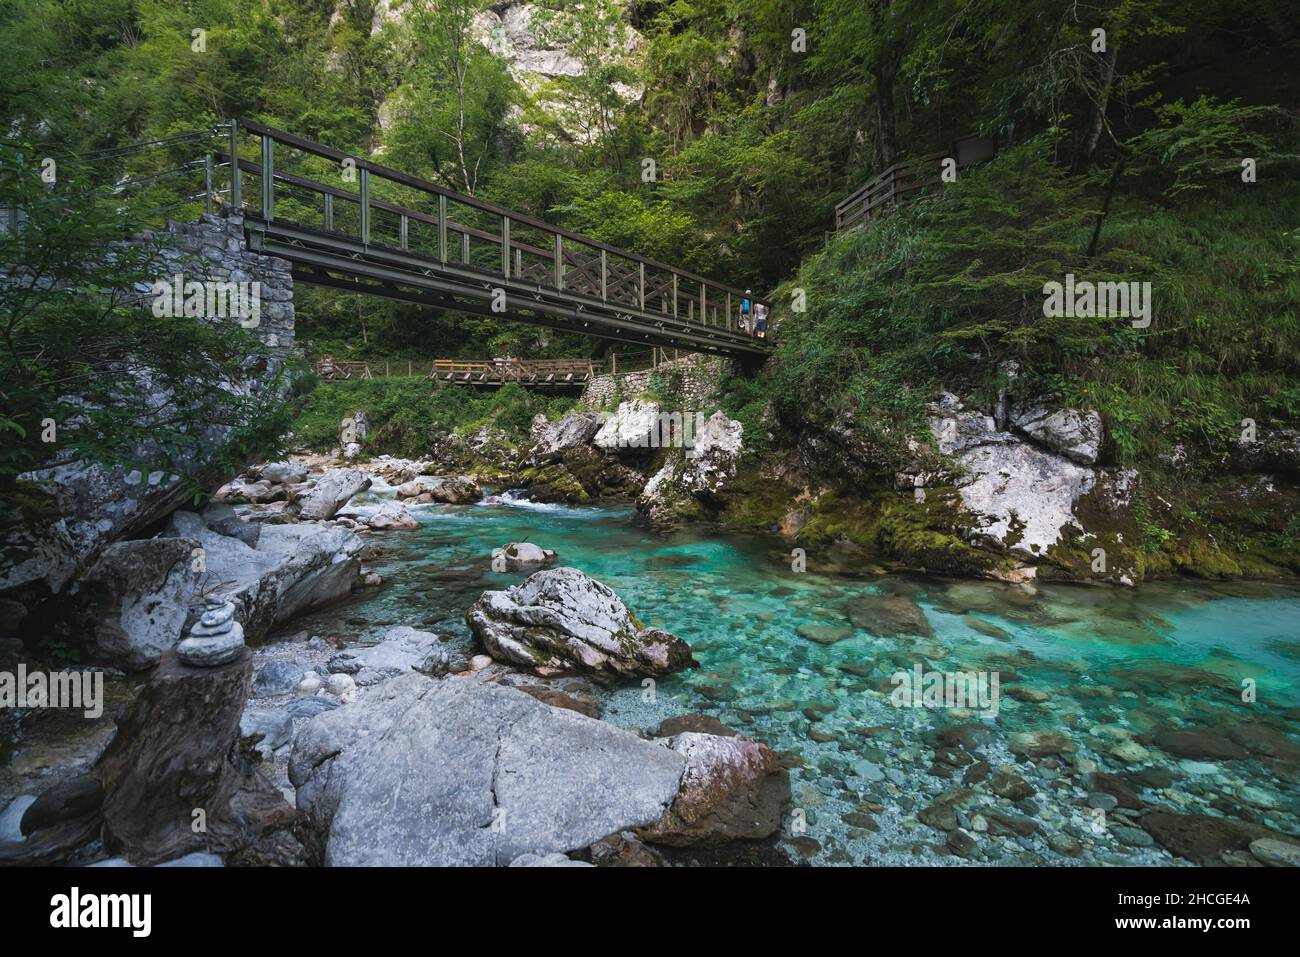 Breathtaking scene of clear streaming water under a bridge connecting two banks Stock Photo